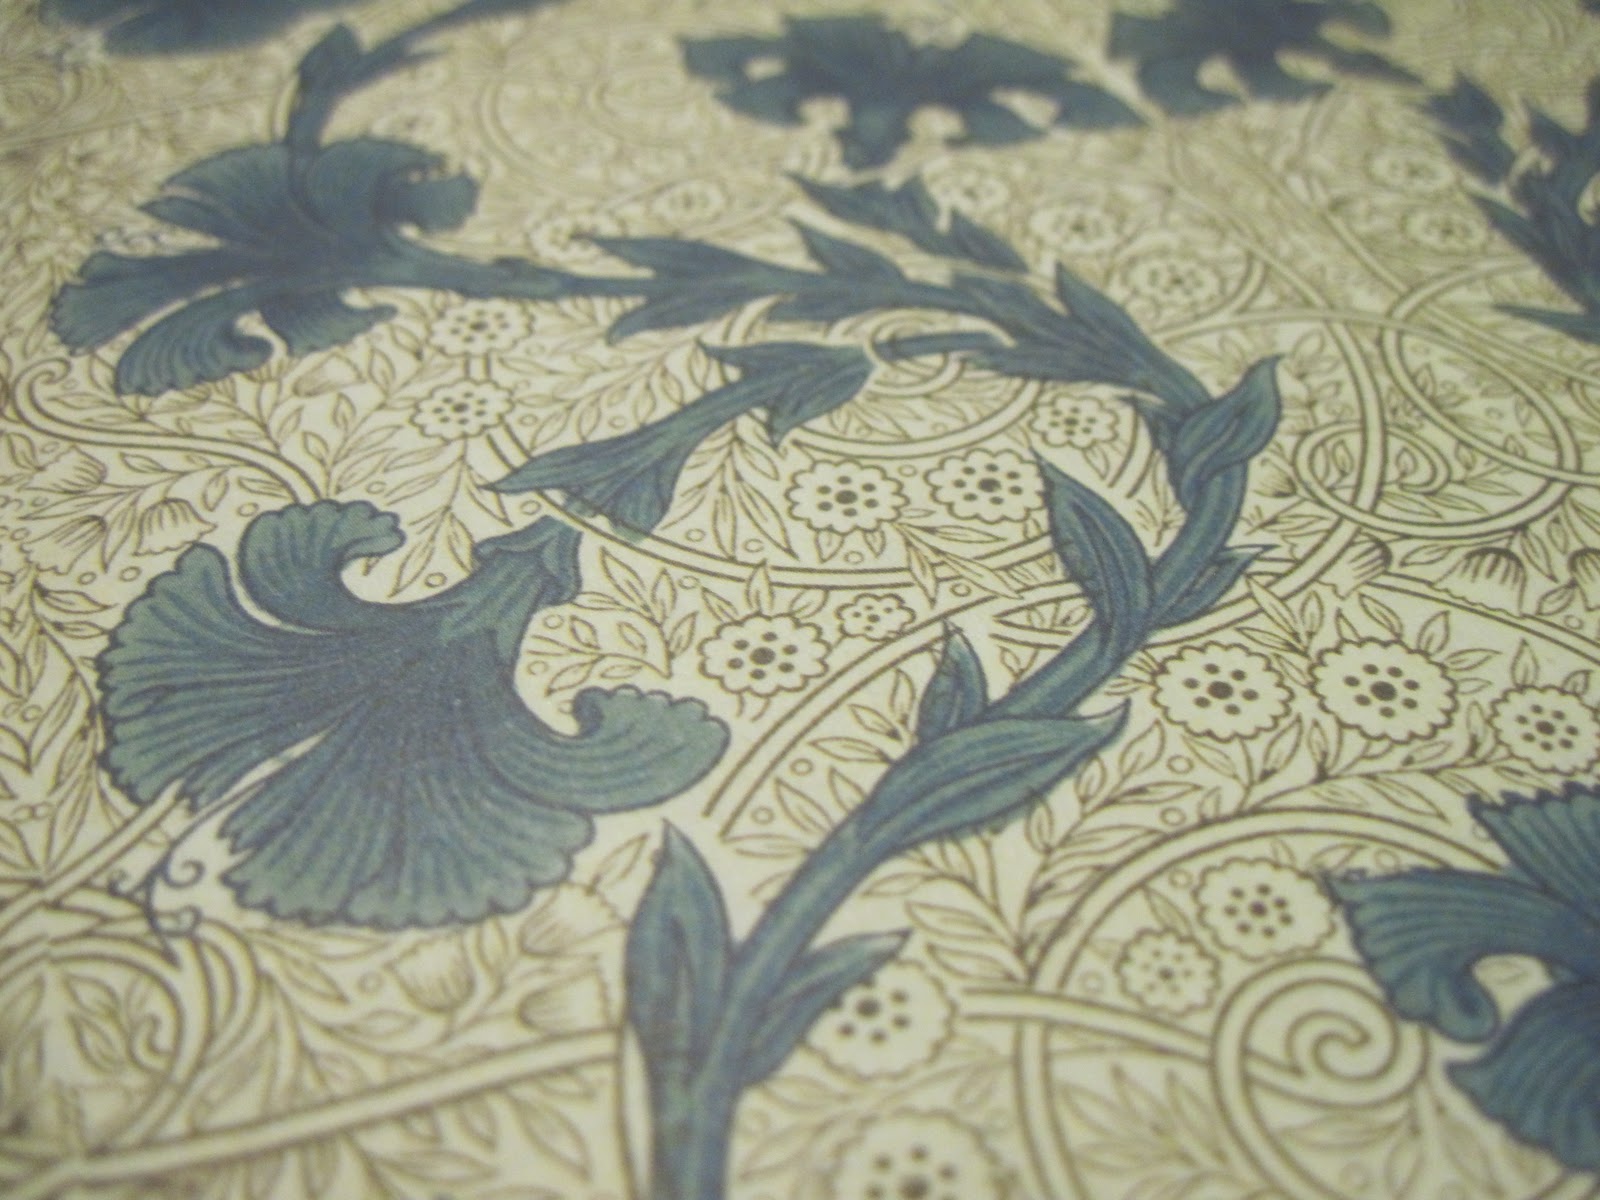 The Craftsman Removable Peel and Stick Wallpaper Collection